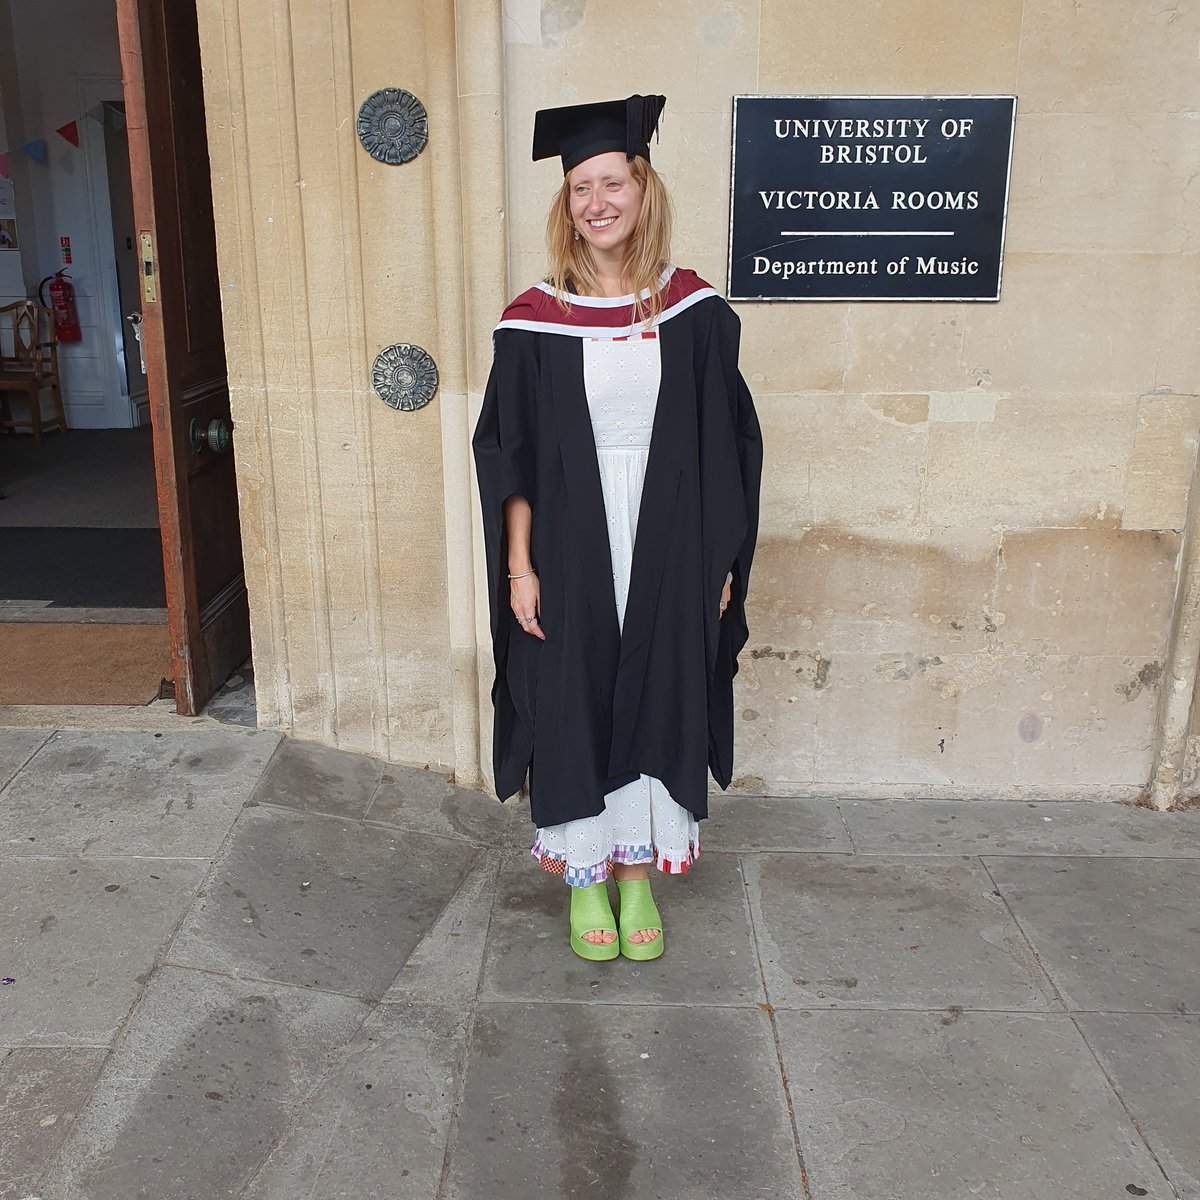 Proud dad day number 2, so proud of Dr Abbie Farrow ❤️